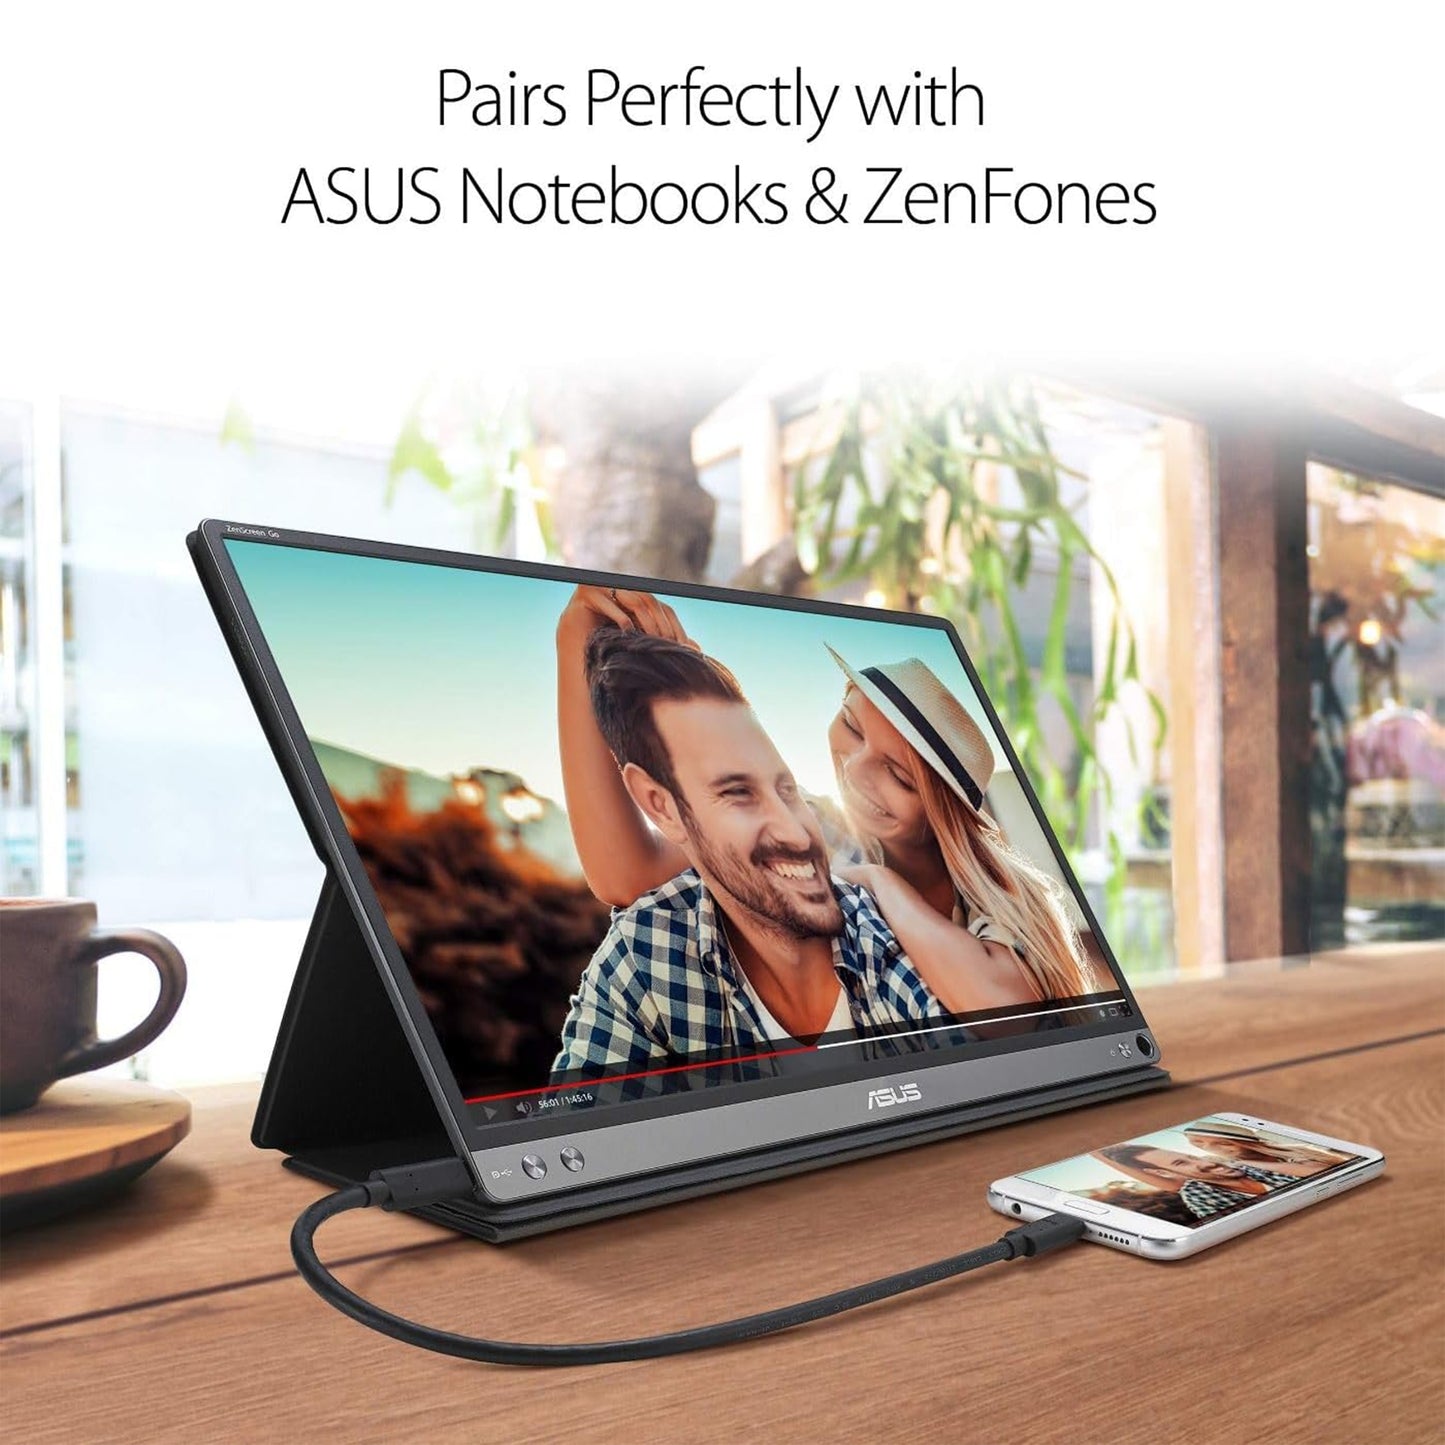 ASUS ZenScreen 15.6” 1080P Portable USB Monitor (MB16AHP) - Full HD, IPS, Eye Care, Micro HDMI, USB Type-C, Speakers, Built-in Battery, External Screen for Laptop